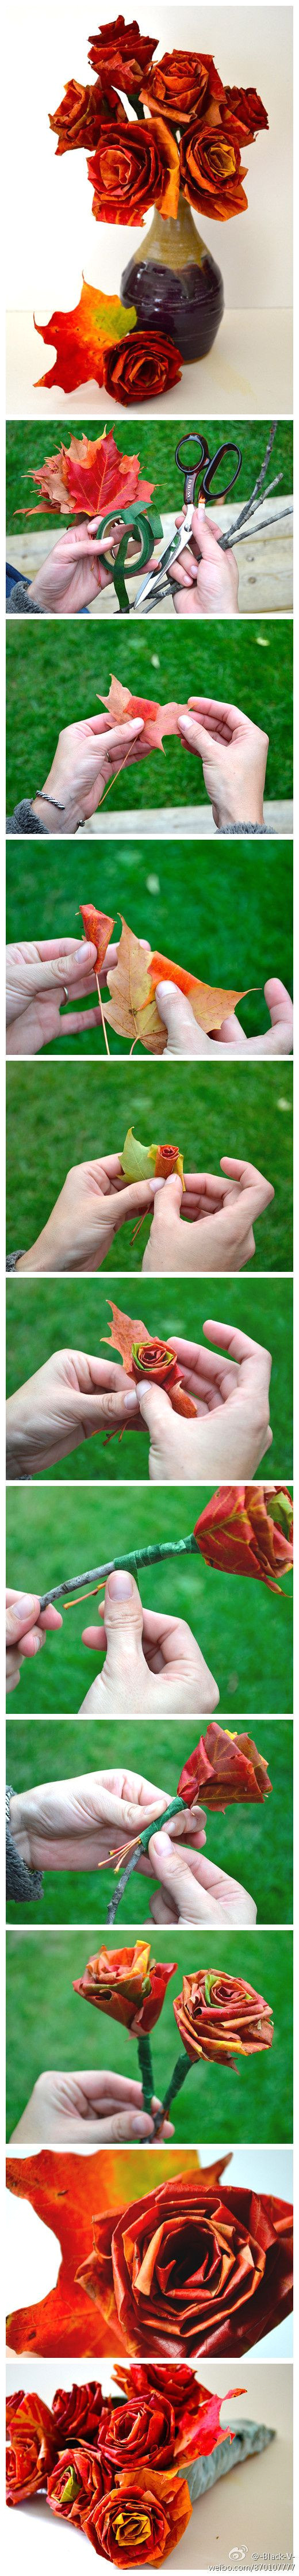 what a great idea to pick up the beautiful fall leaves in lubbock or wherever you live to make these unique fall leaf roses